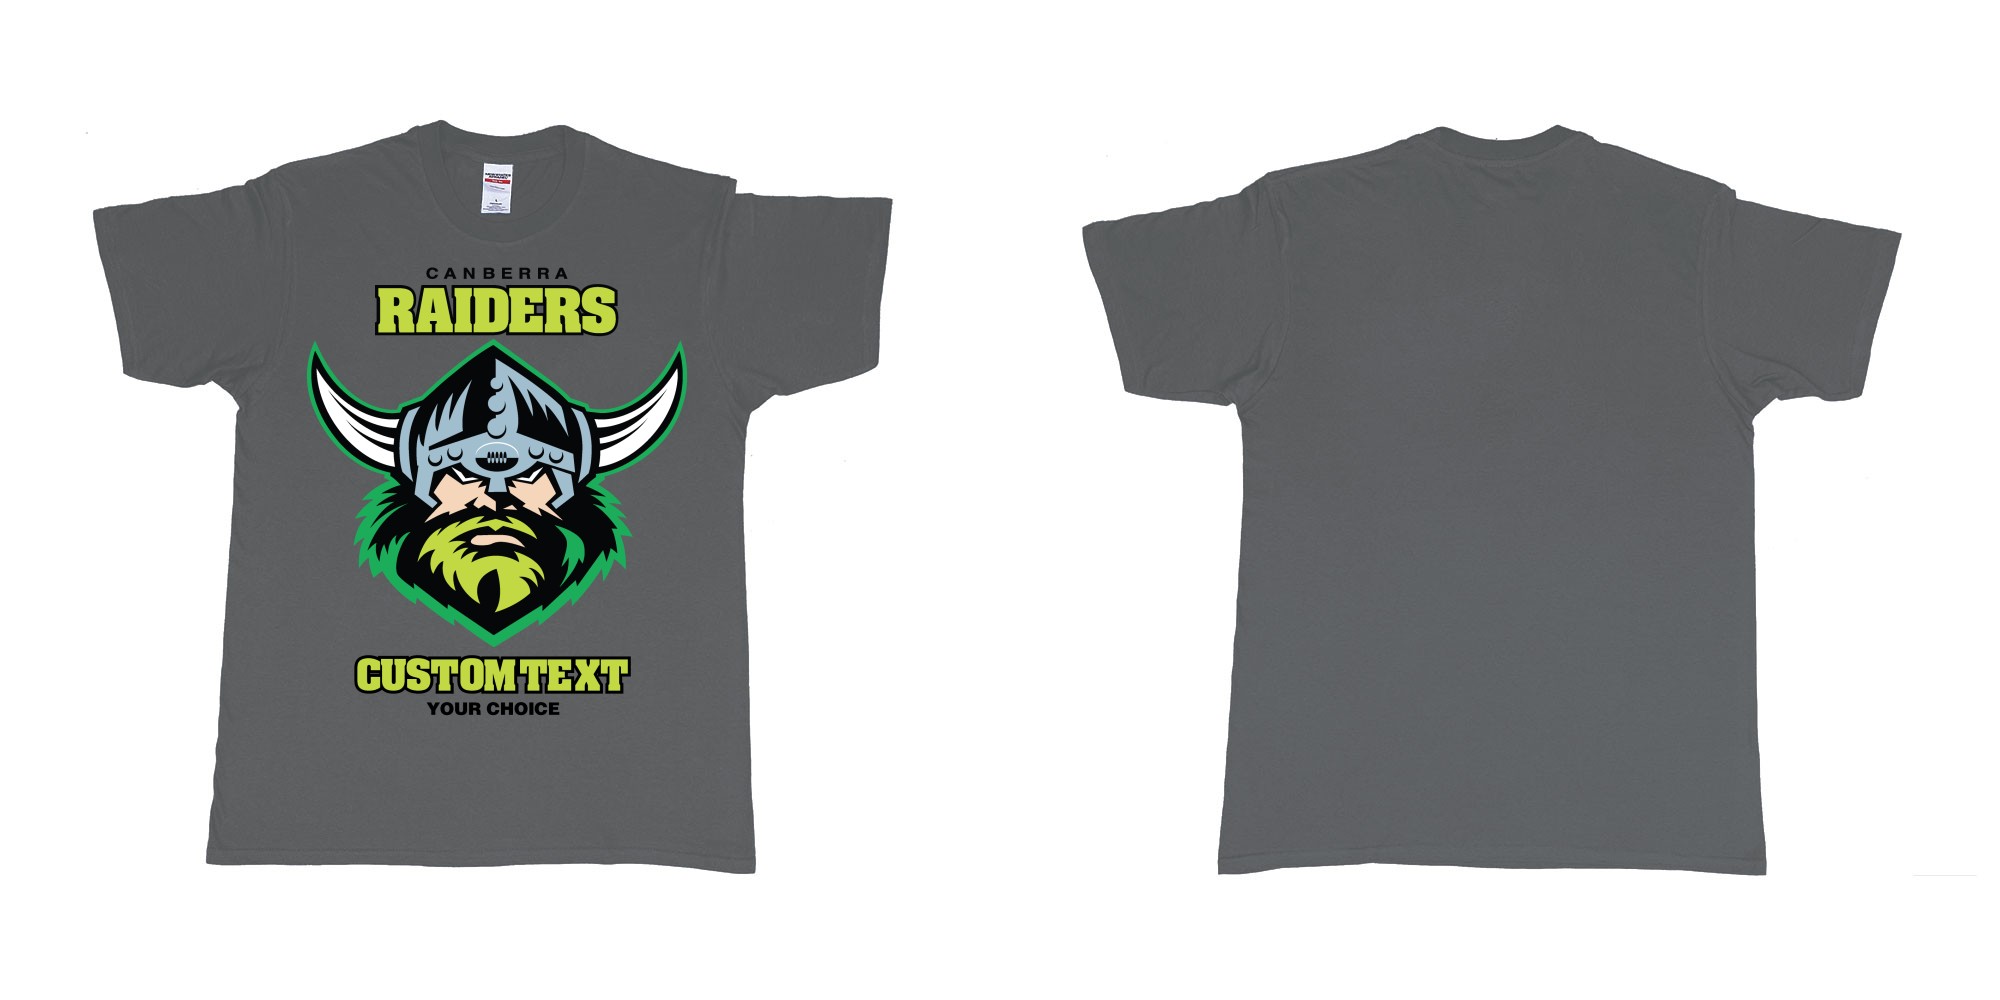 Custom tshirt design canberra raiders nrl logo own printed text near you in fabric color charcoal choice your own text made in Bali by The Pirate Way